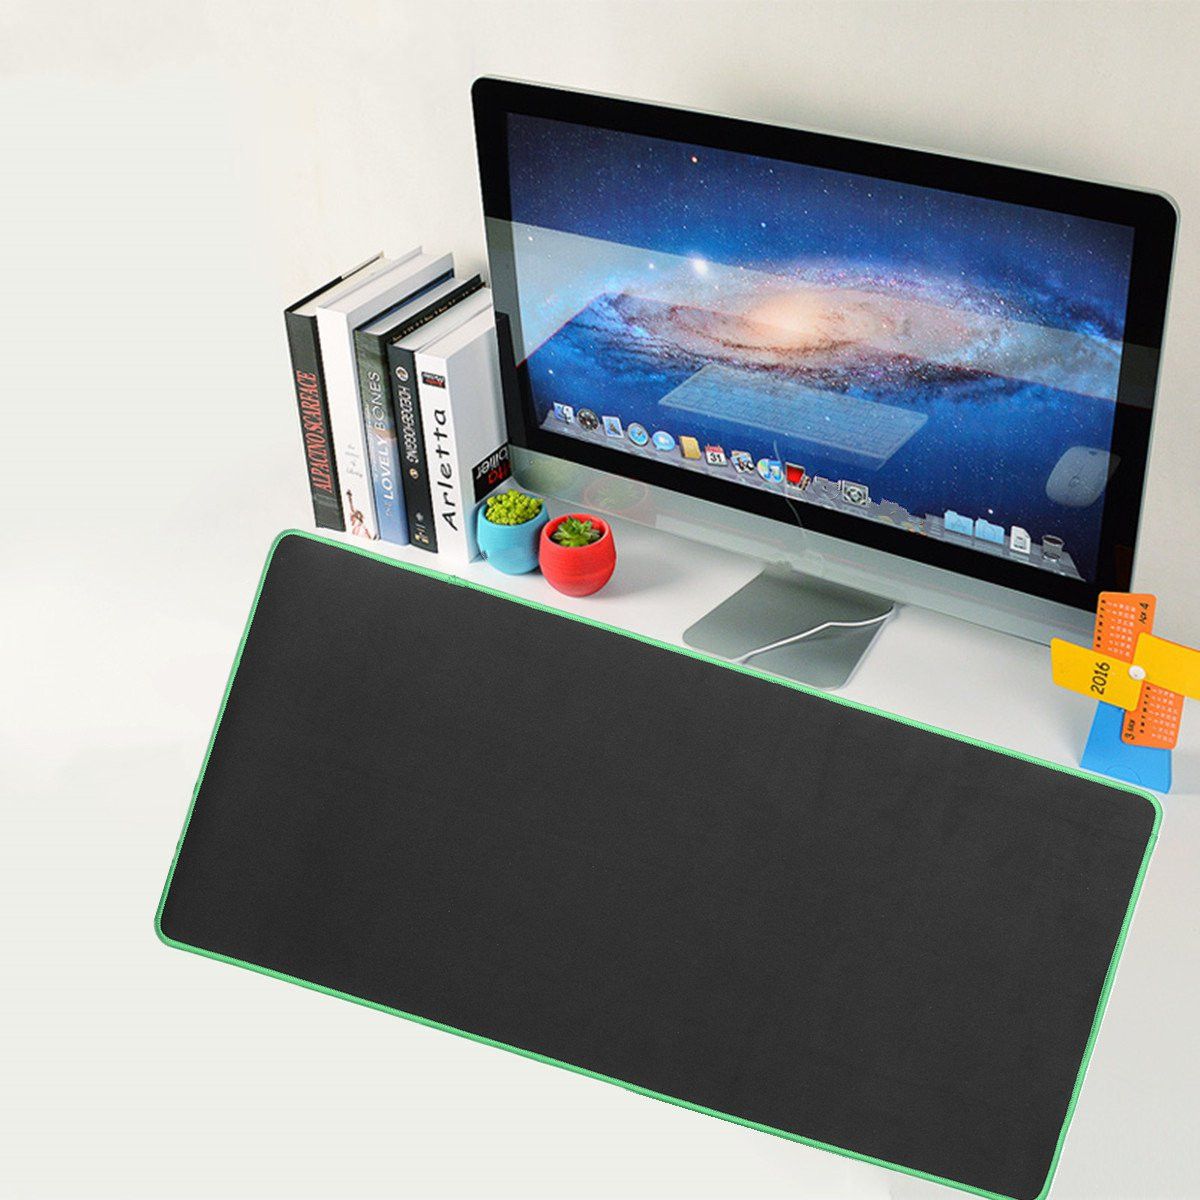 600x300x2mm-Black-Anti-Slip-Natural-Rubber-Cloth-Office-Keyboard-Mouse-Pad-1113241